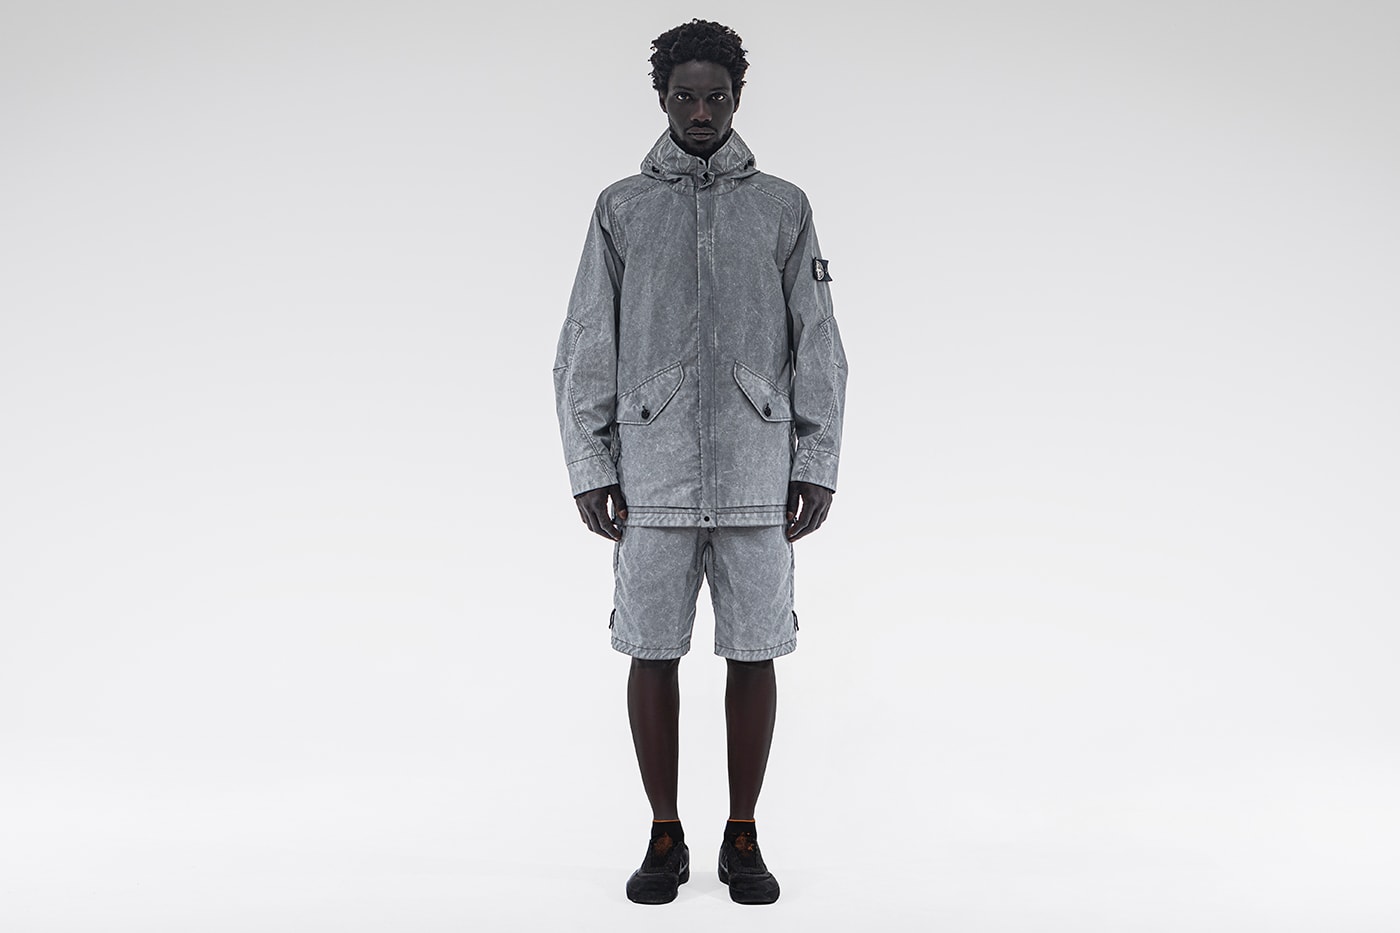 LUISAVIAROMA Exclusive Stone Island Plated Reflective Dust Shorts Parka Release Info Buy